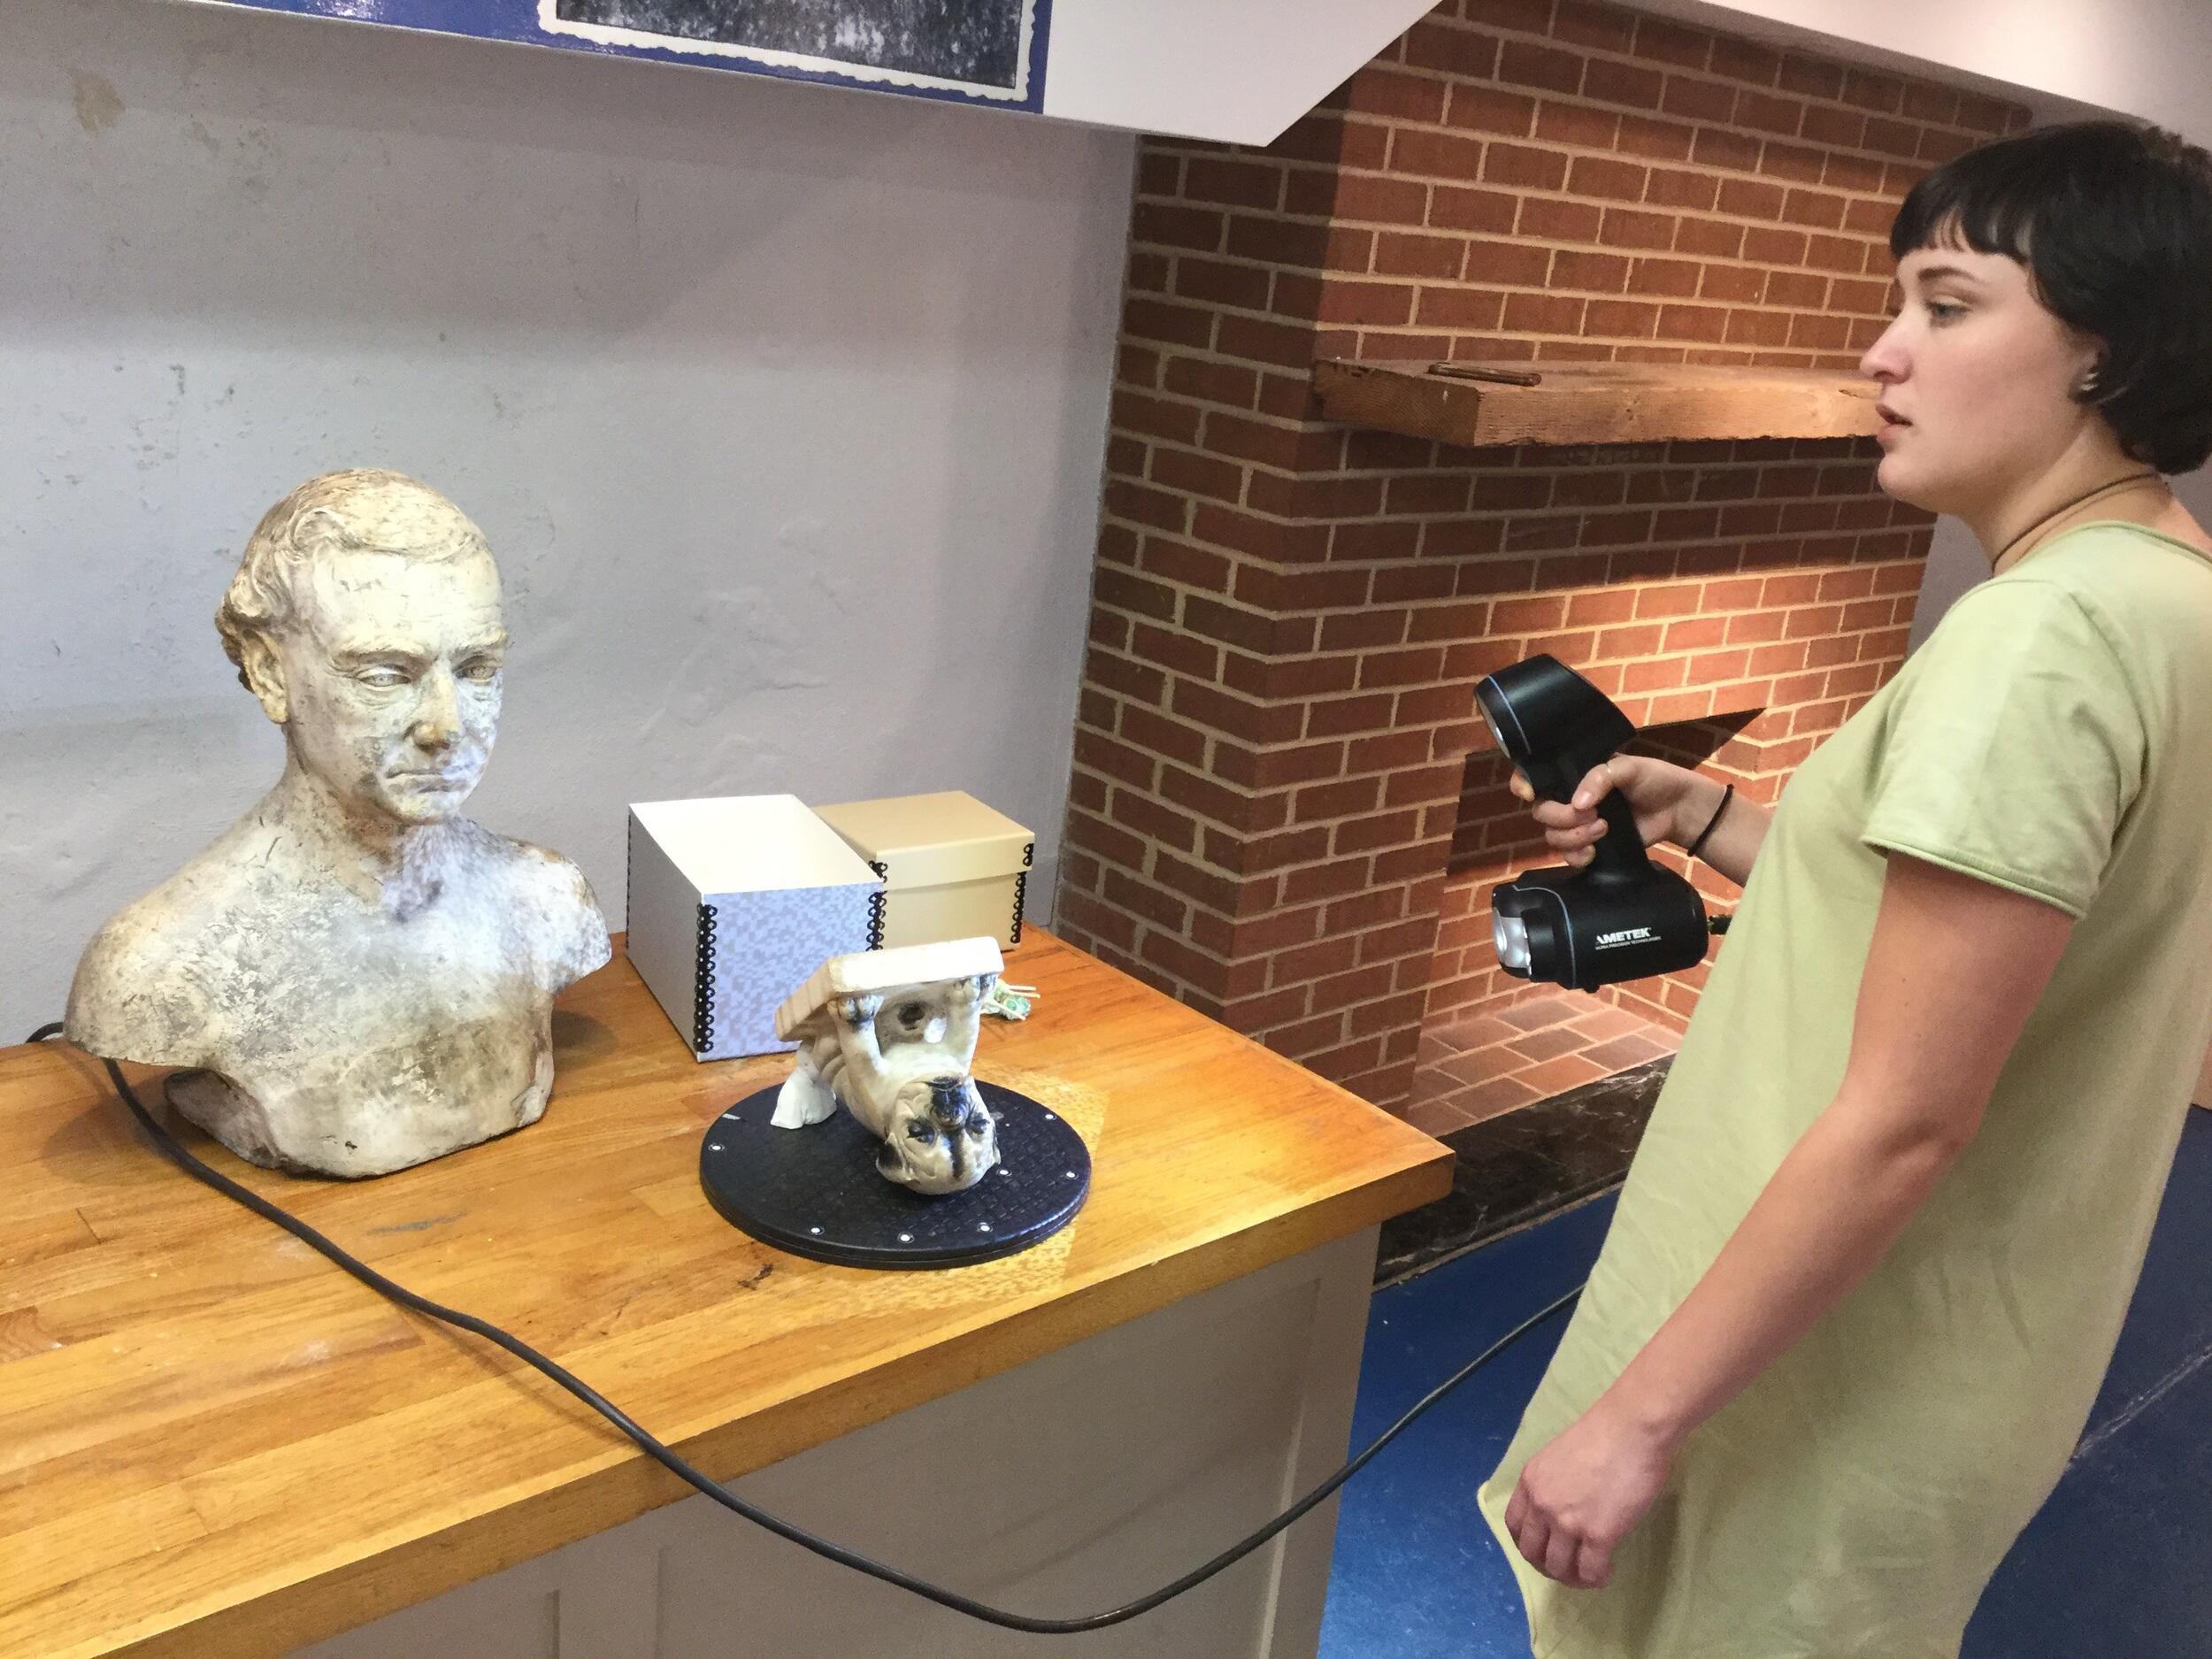 A person holds a black 3D scanner. A sculpture of a pug dog and the bust of an unknown person are seated on the table.